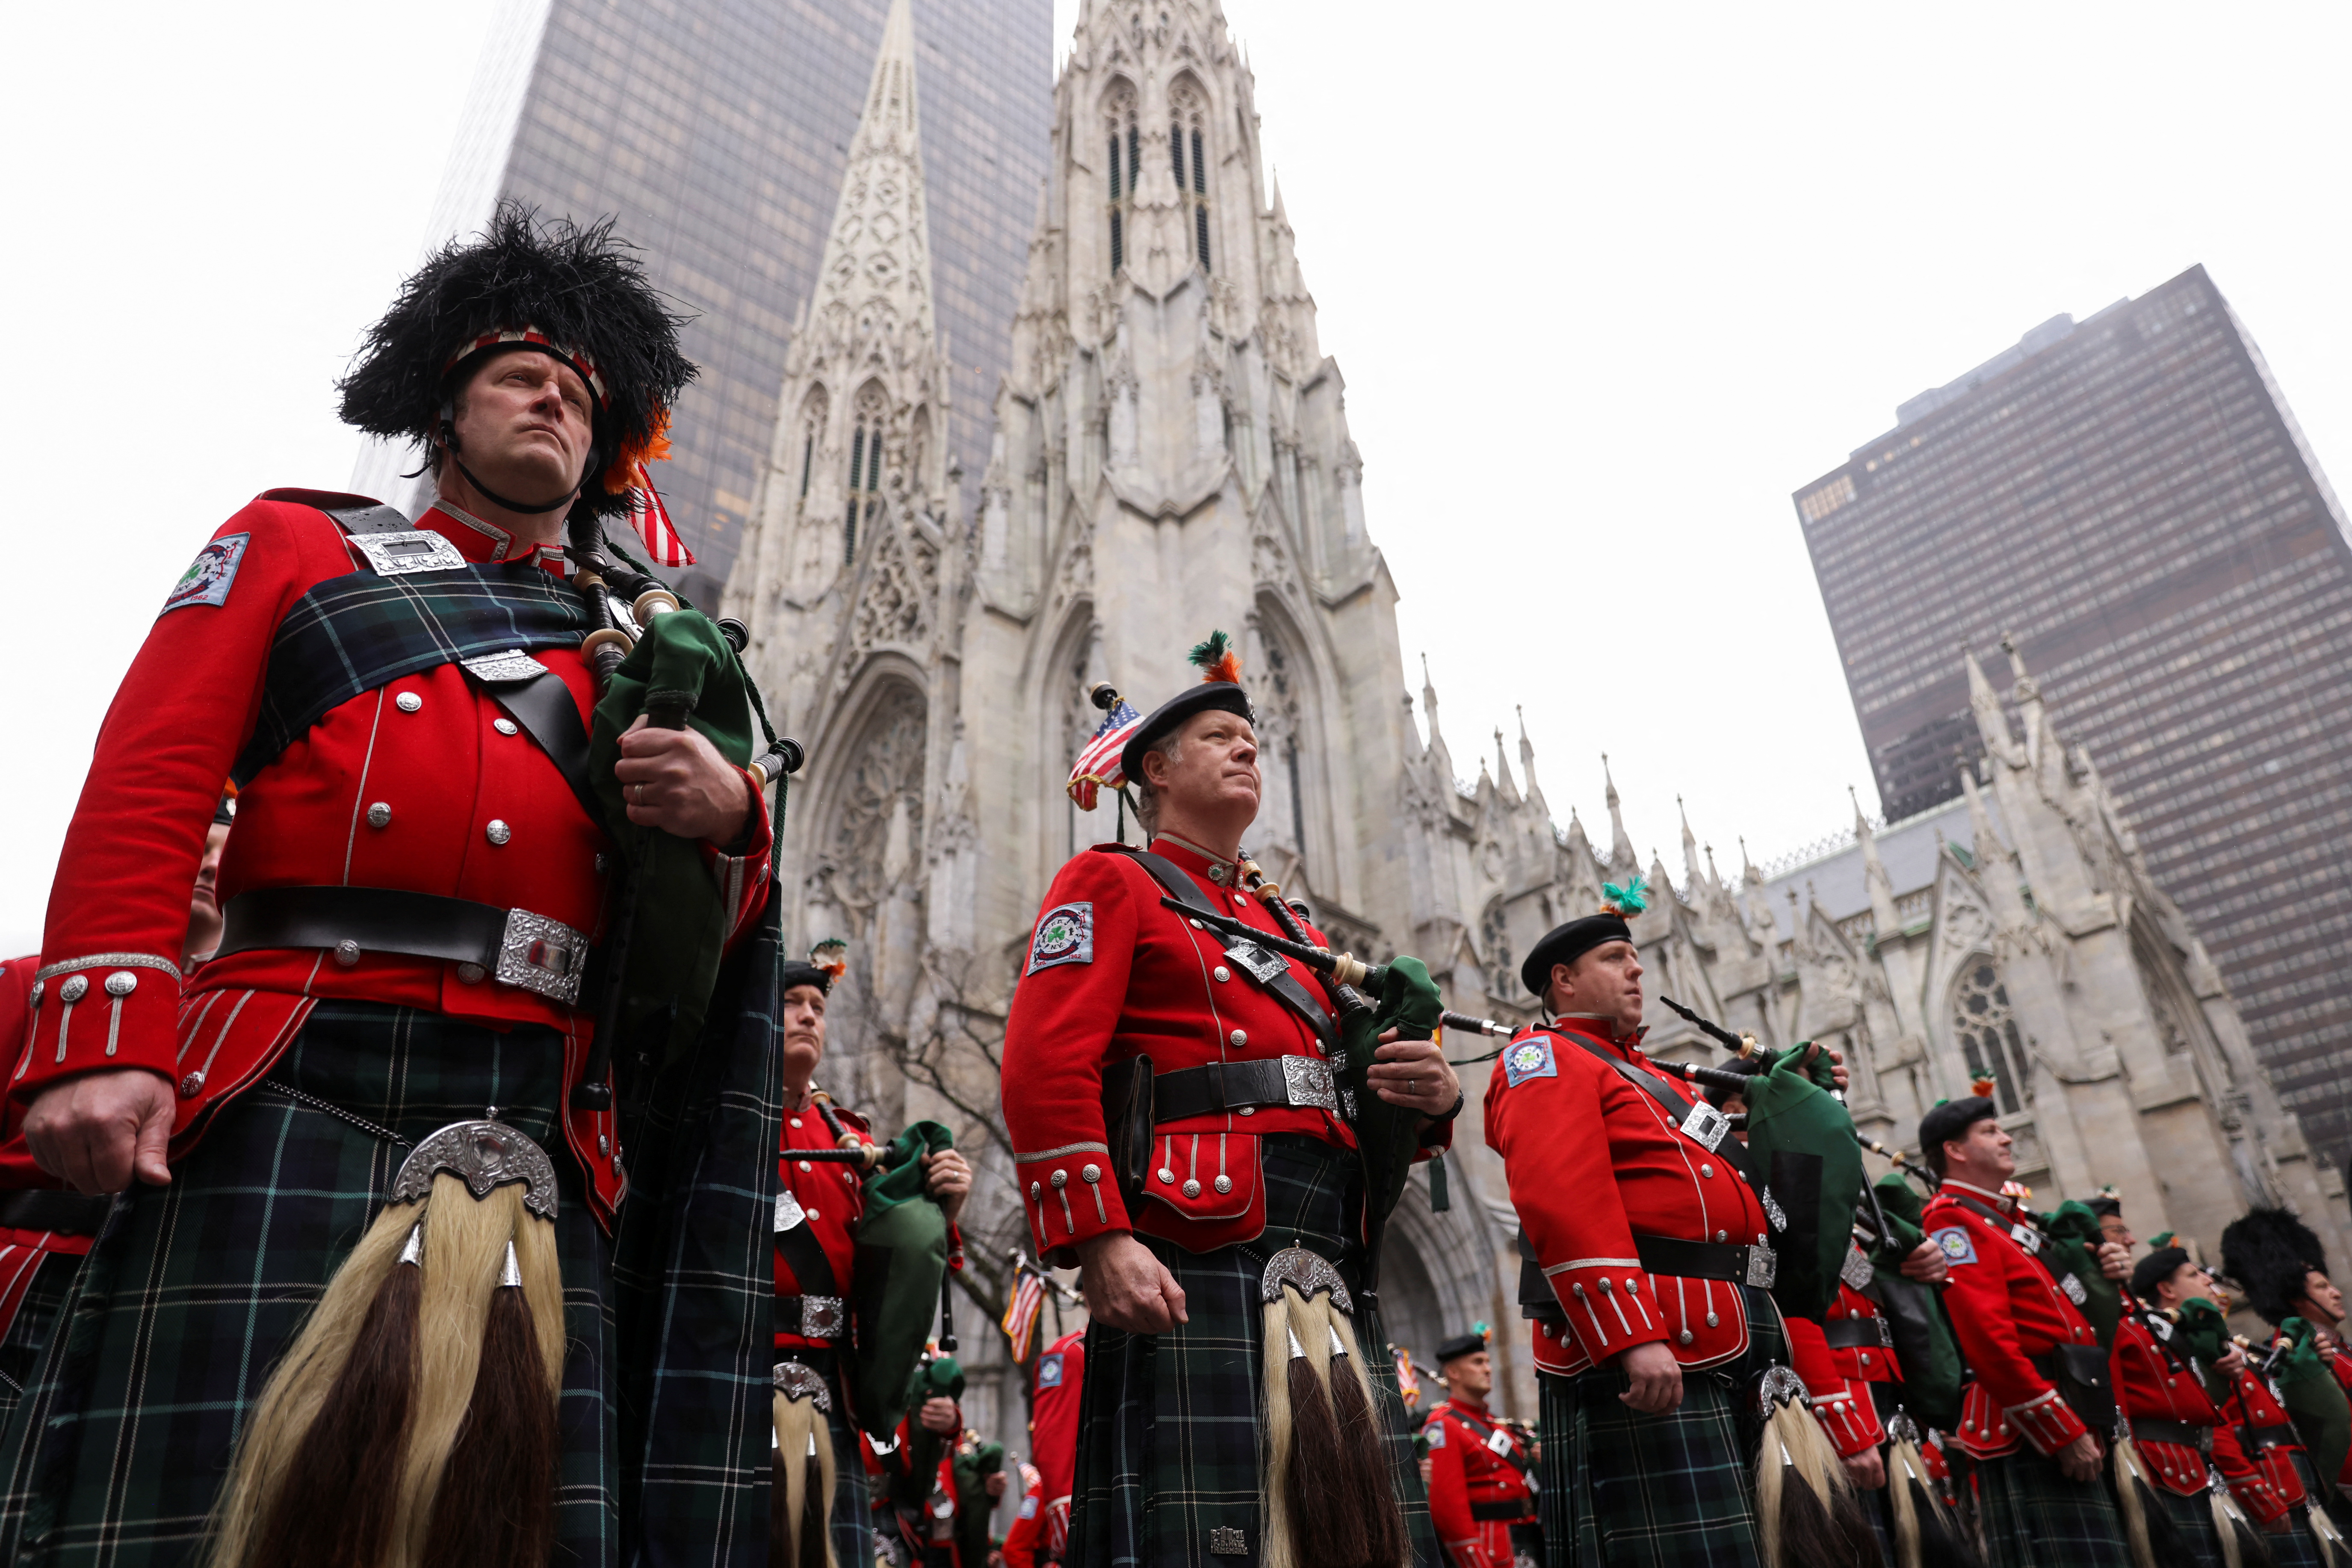 NYC's St. Patrick's Day Parade 2021 - virtual due to COVID?